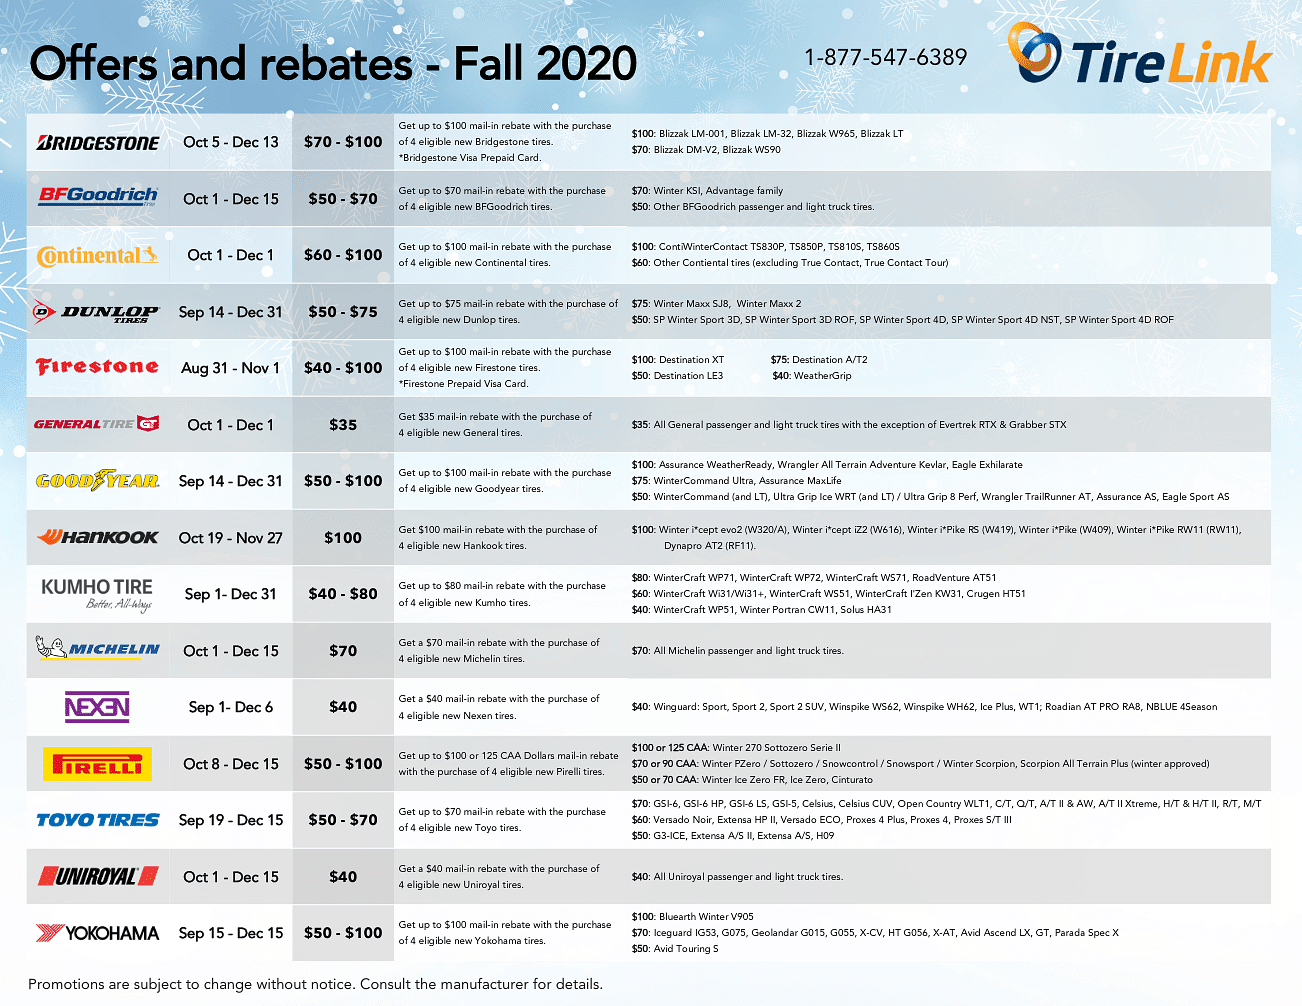 Offers and rebates - Fall 2020